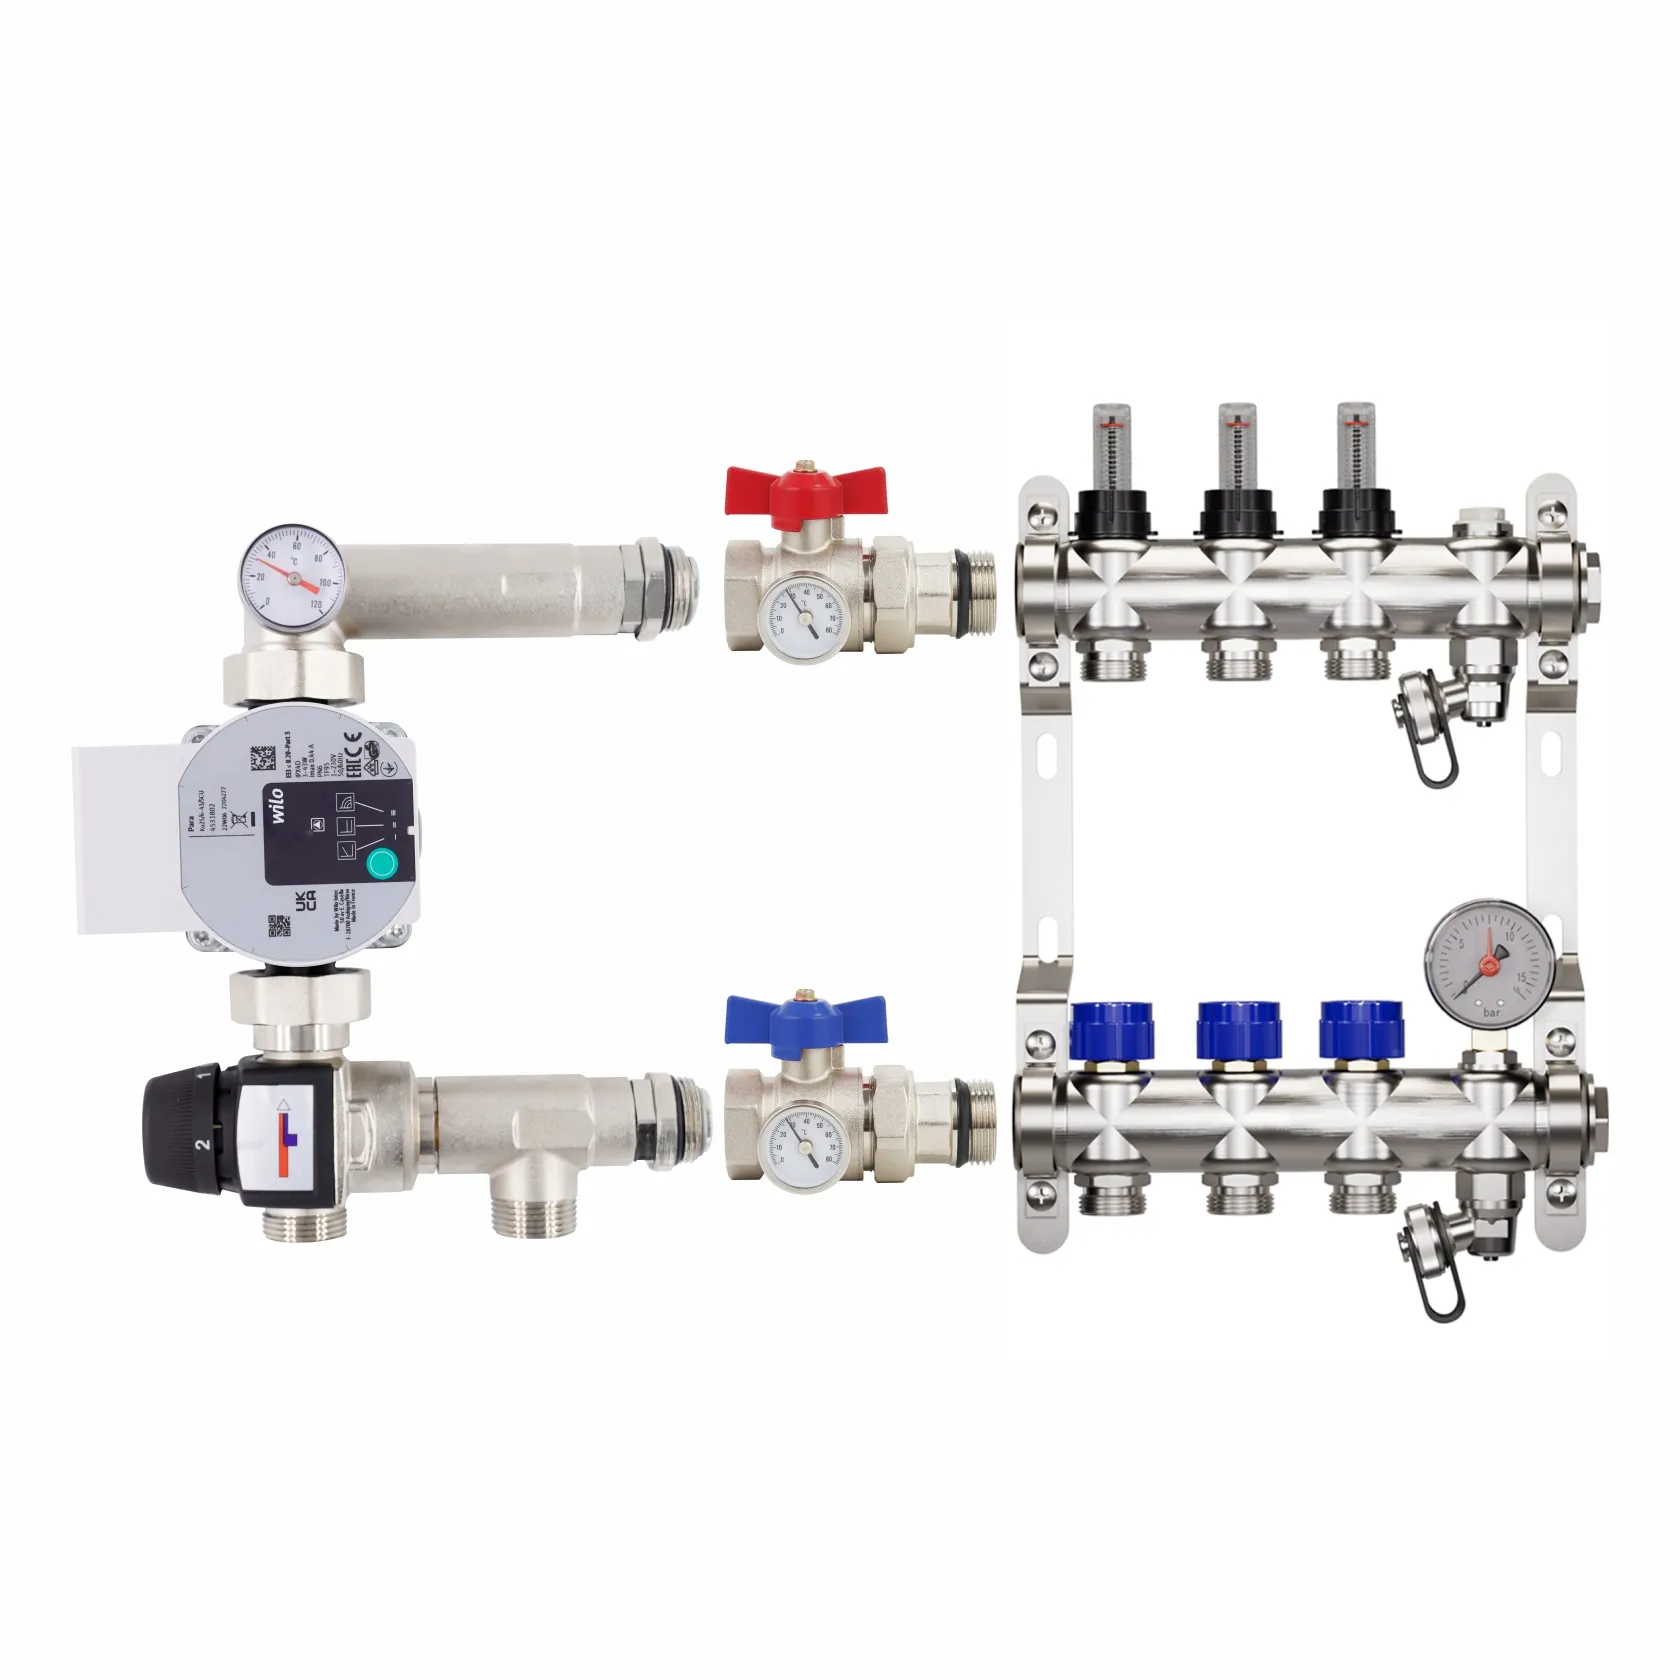 ZHONGLIANG radiant hydronic floor heating Flow Meter Brass Stainless Steel Manifold pump control pack Floor mixing unit